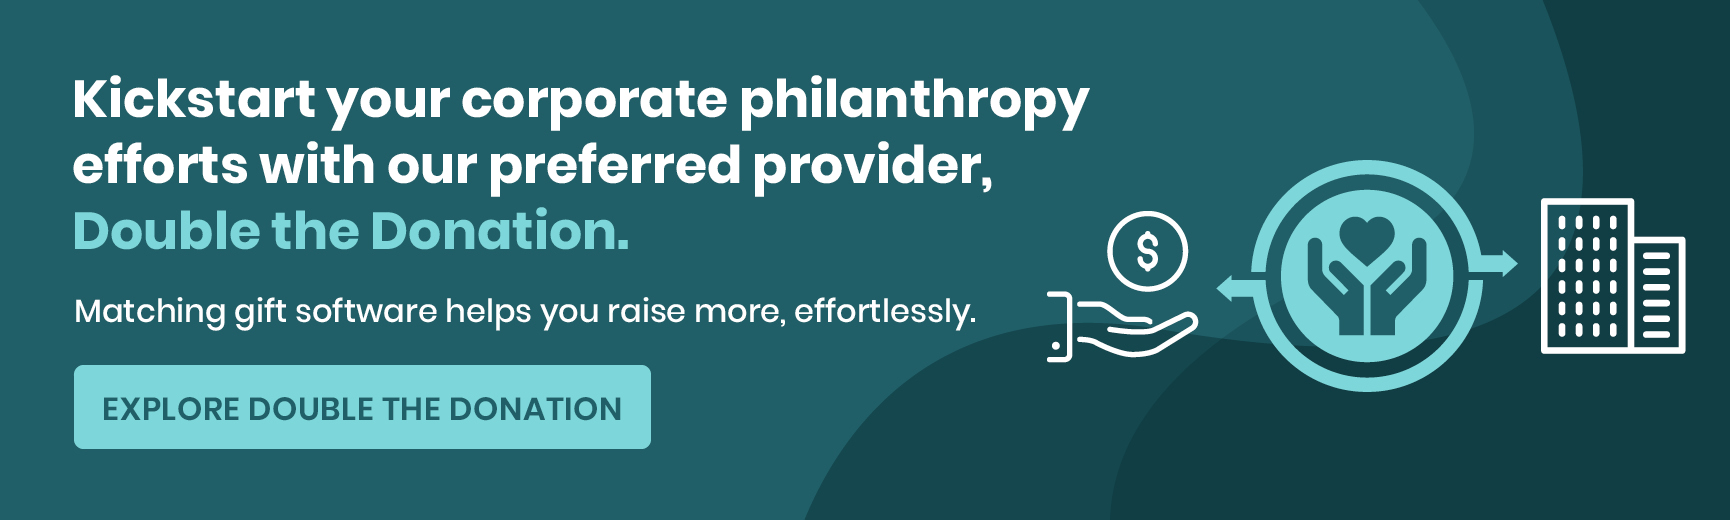 Learn more about how Double the Donation can kickstart your corporate philanthropy efforts.